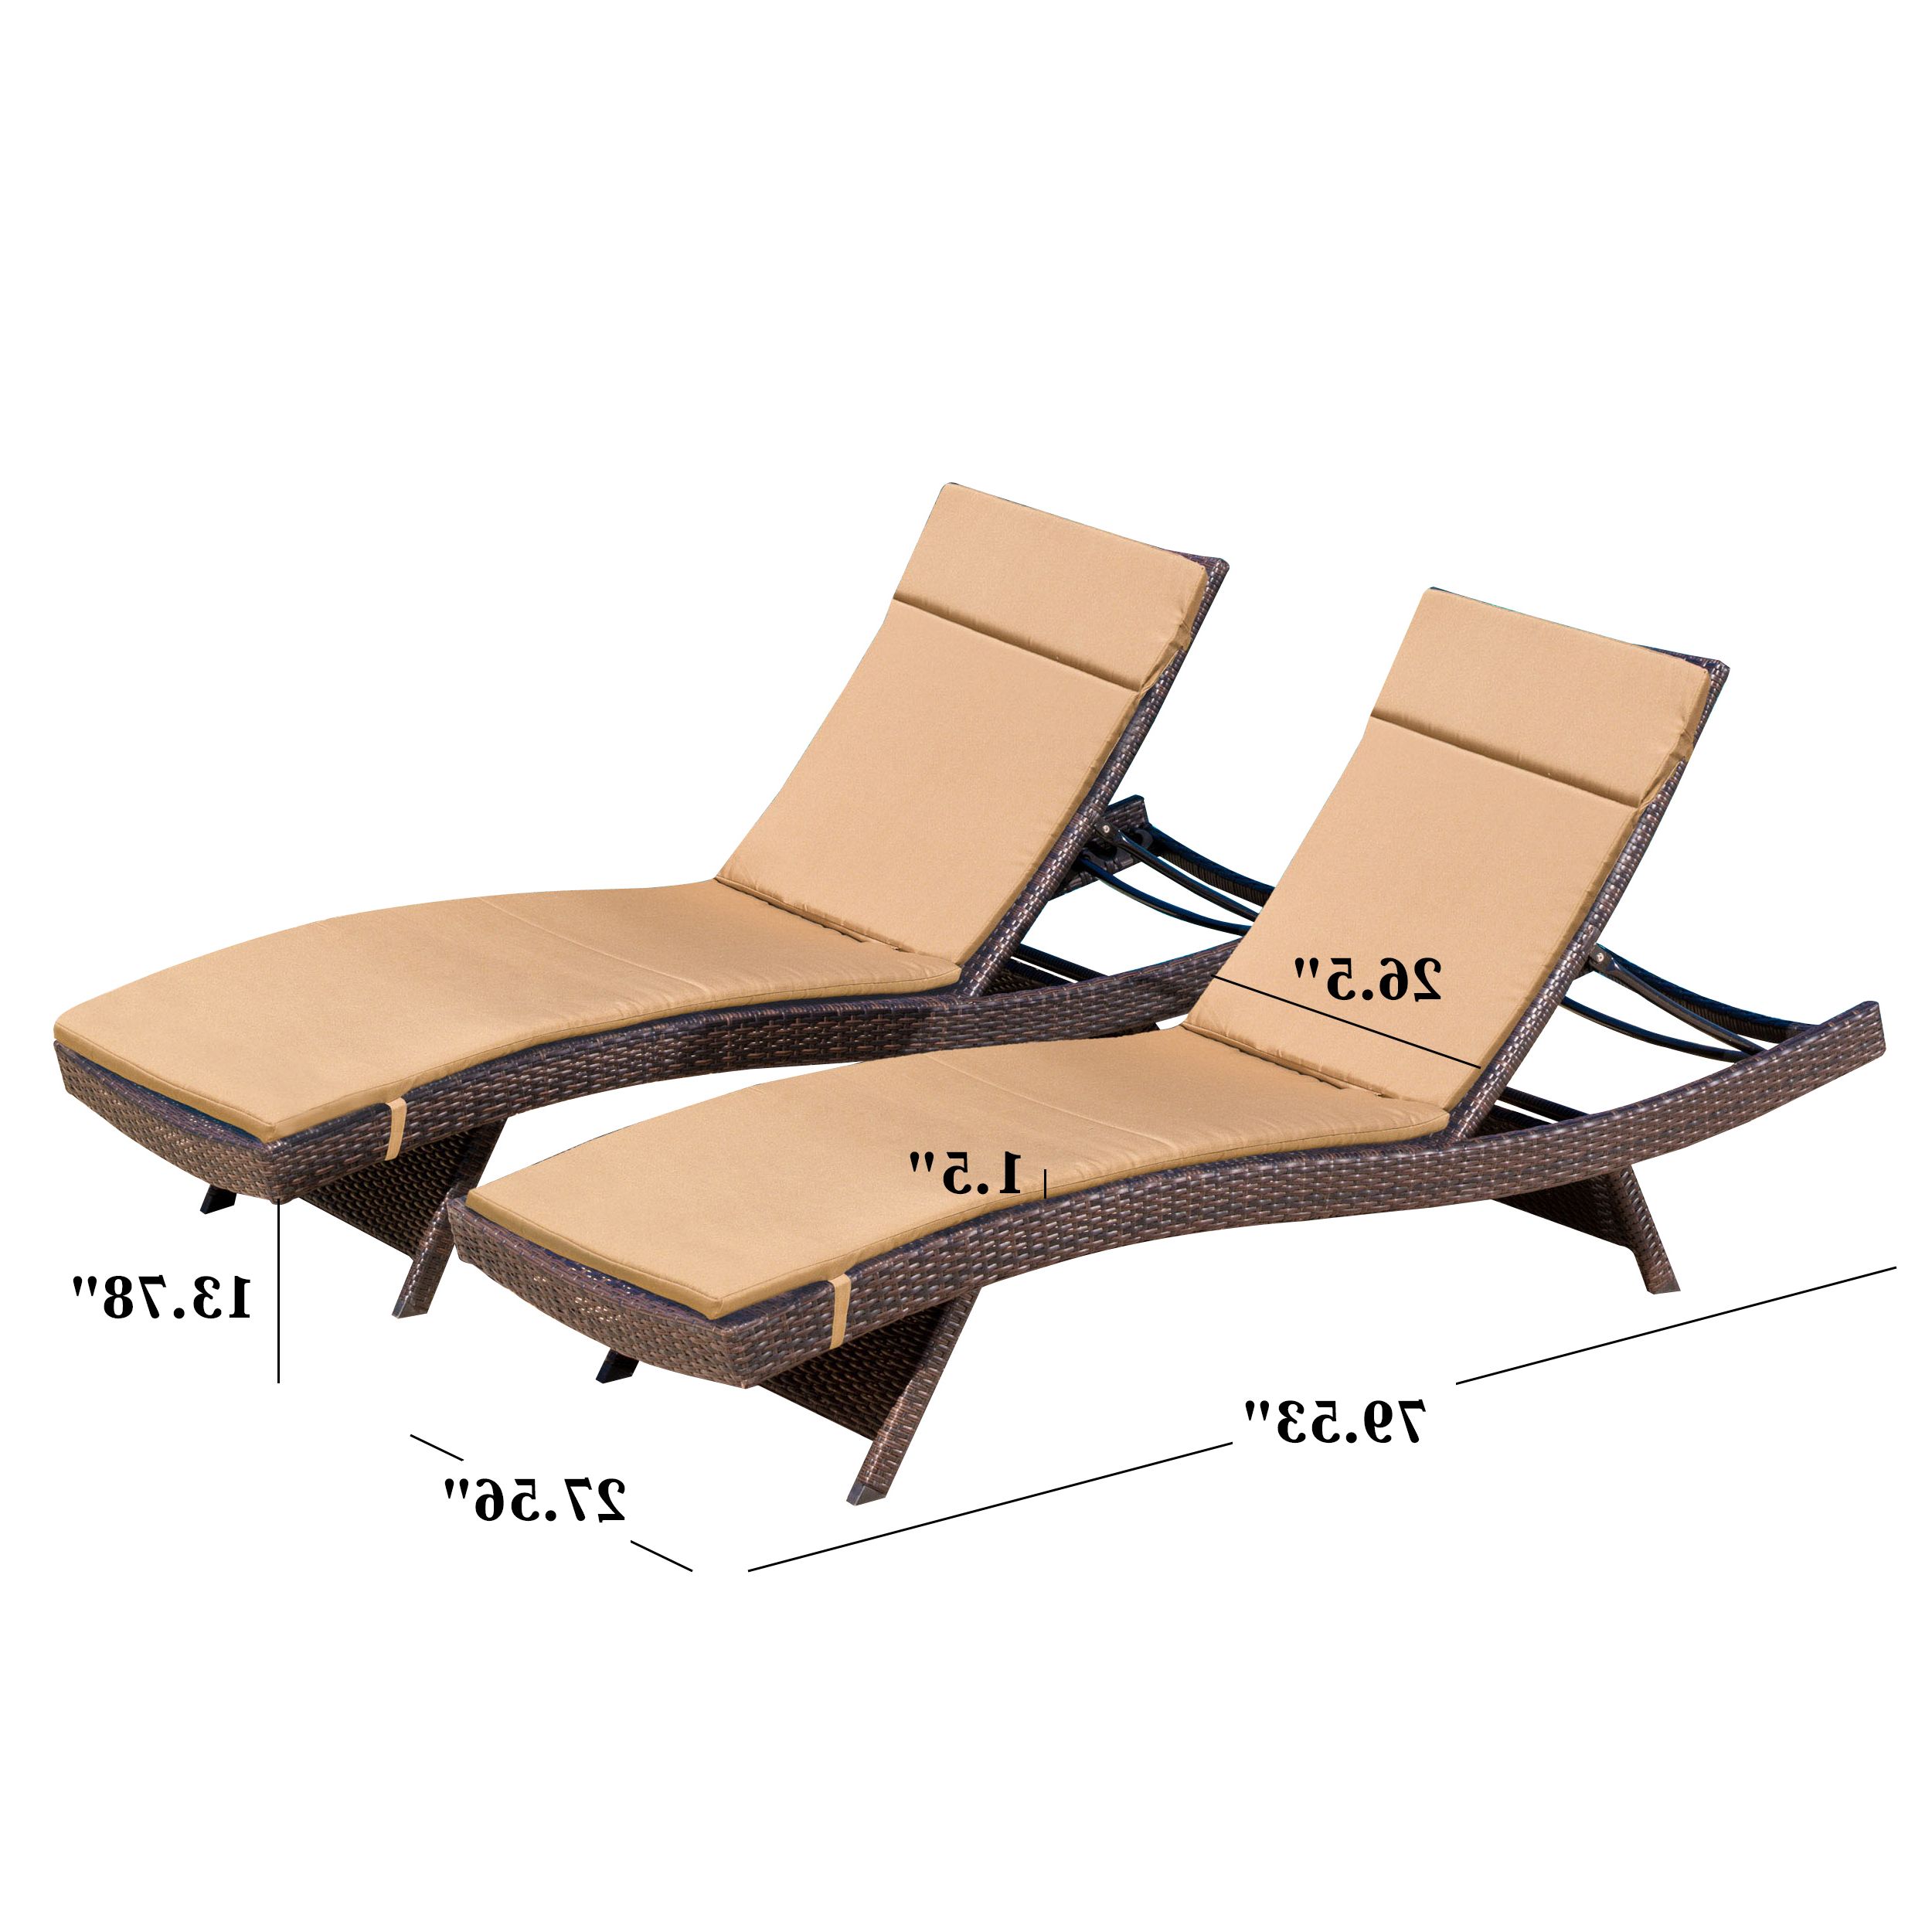 Chenoa Outdoor Brown Wicker Adjustable Chaise Lounge With Cushion (set Of 2) With Regard To Recent Wicker Adjustable Chaise Loungers With Cushion (View 2 of 25)